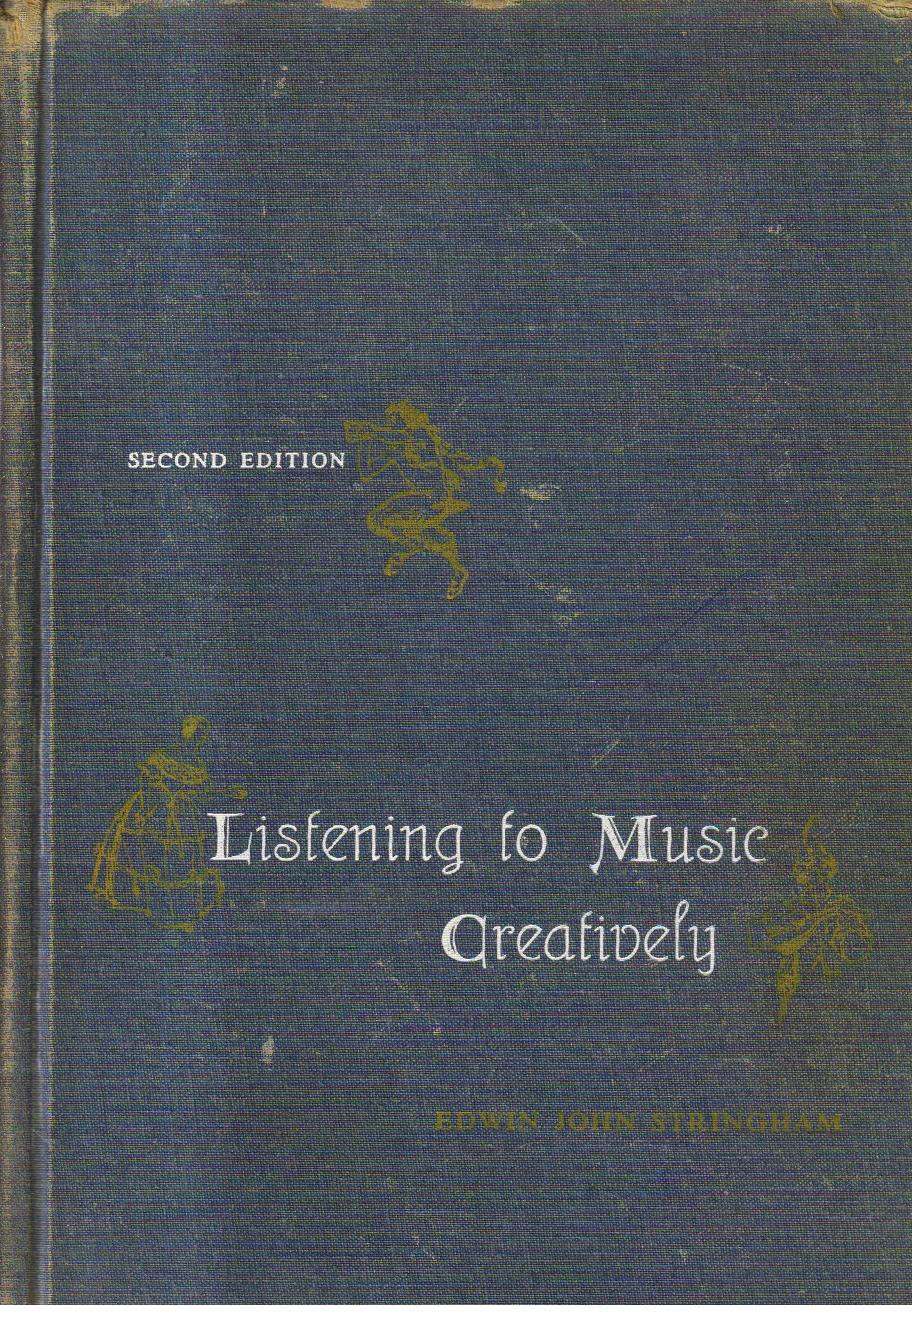 Listening to Music Creatively.